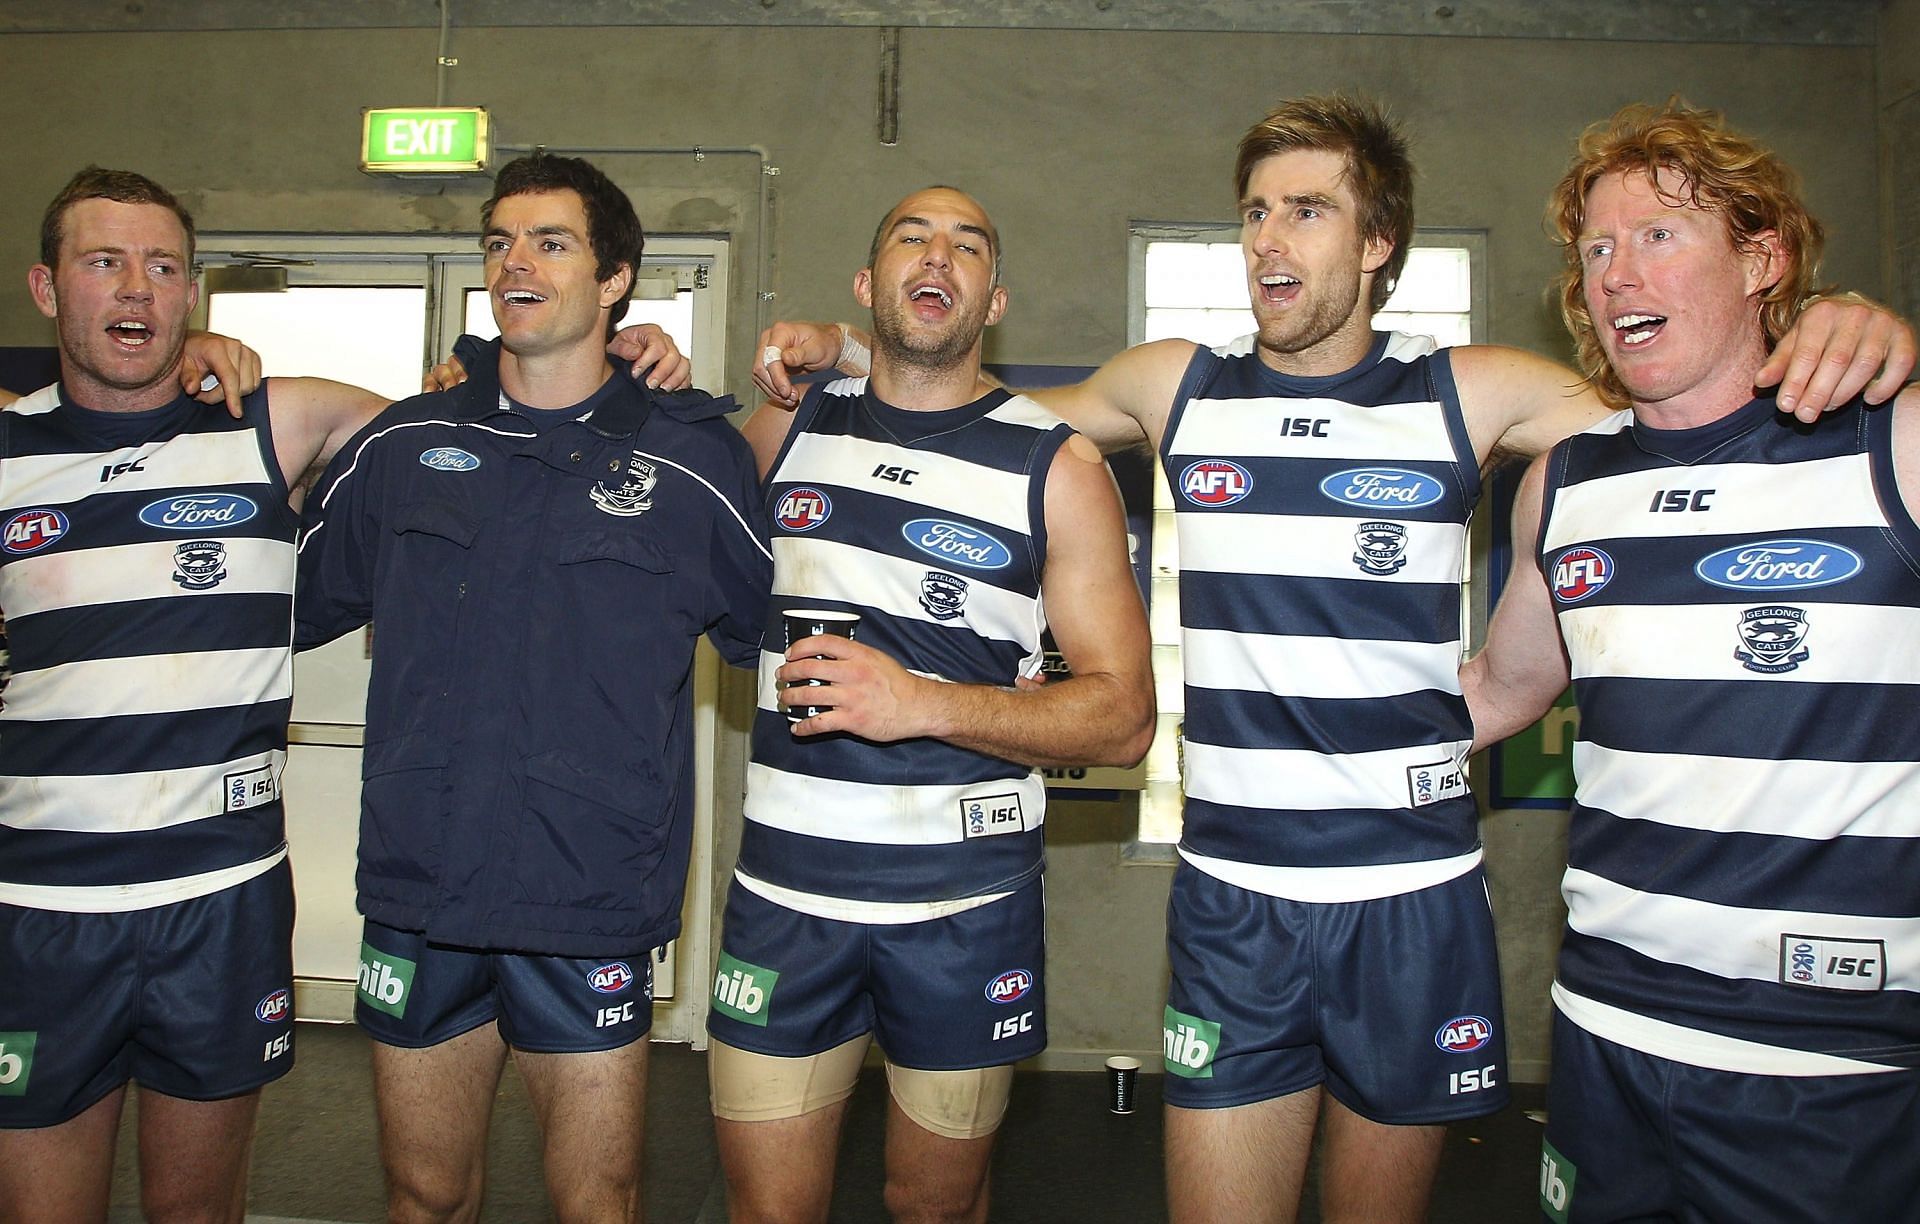 Geelong defeated Gold Coast by 150 points